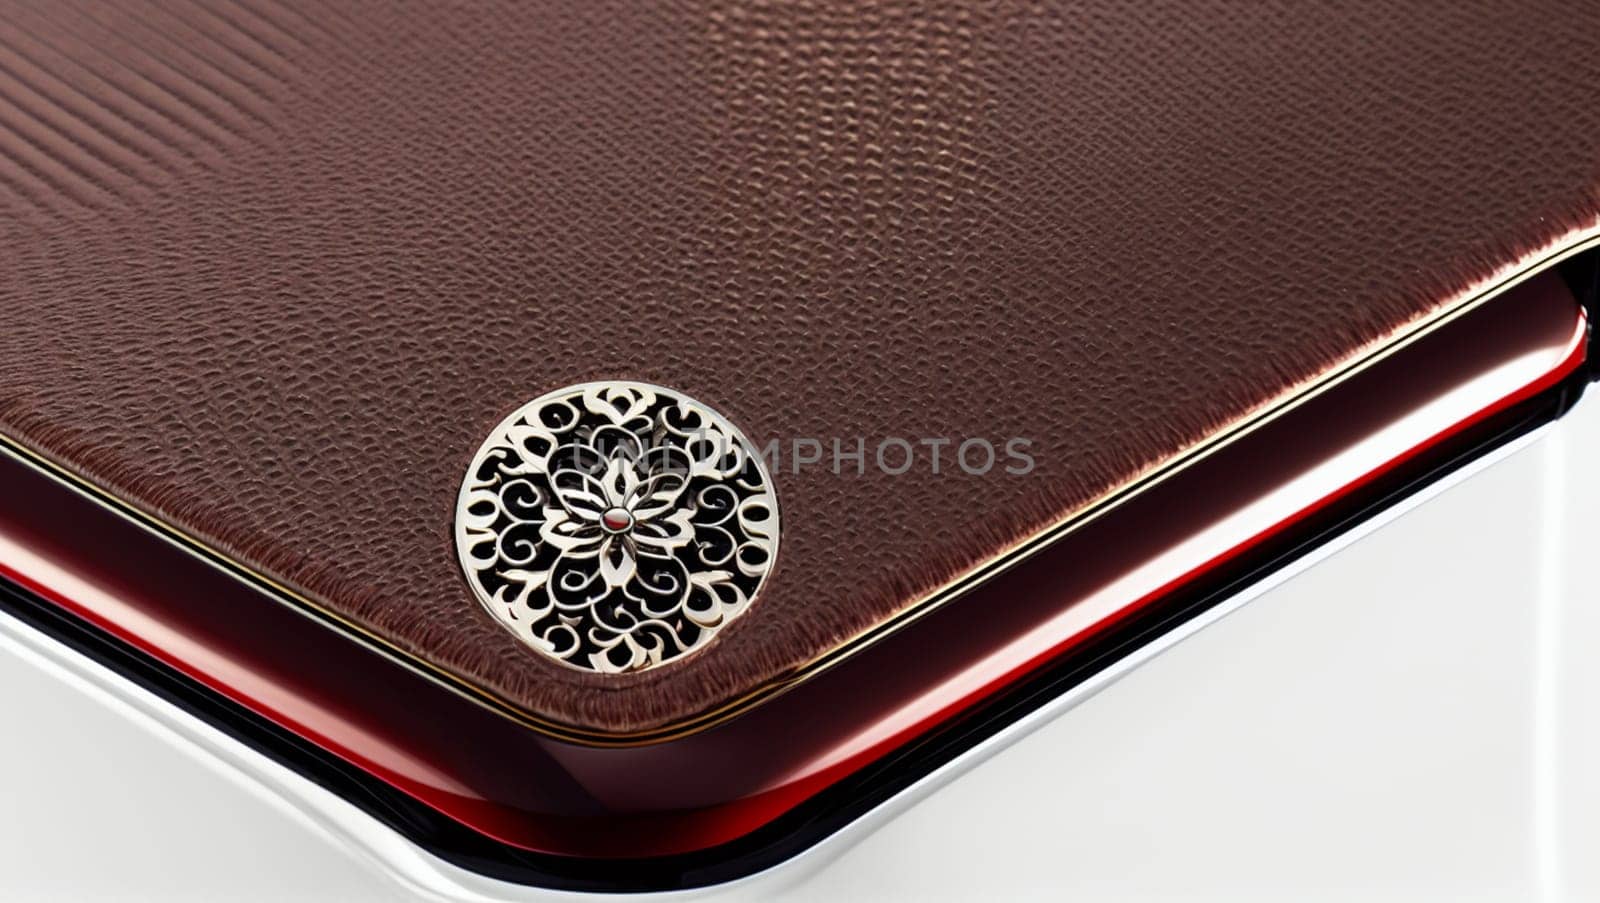 Decorative background with brown leather cell phone cover with ornaments. by XabiDonostia